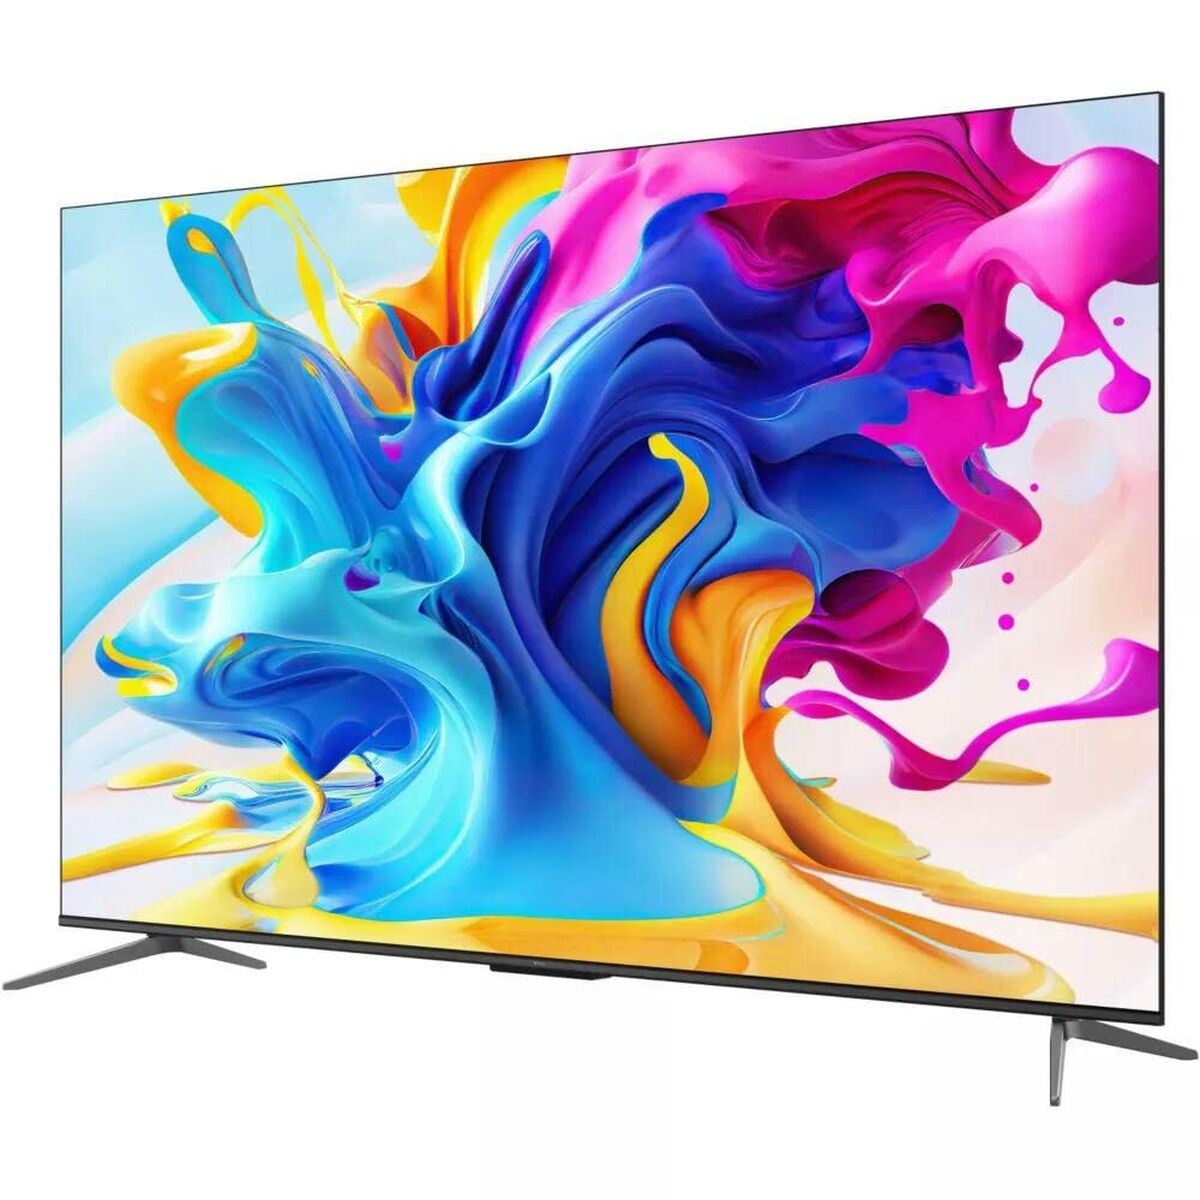 Television TCL 75C649 4K Ultra HD HDR 75" QLED Direct-LED AMD FreeSync, TCL, Electronics, TV, Video and home cinema, television-tcl-75c649-4k-ultra-hd-hdr-75-qled-direct-led-amd-freesync, :75 INCHES or 190.5 CM, :AMD Freesync, :QLED, :Ultra HD, Brand_TCL, category-reference-2609, category-reference-2625, category-reference-2931, category-reference-t-18805, category-reference-t-19653, cinema and television, Condition_NEW, entertainment, Price_800 - 900, RiotNook